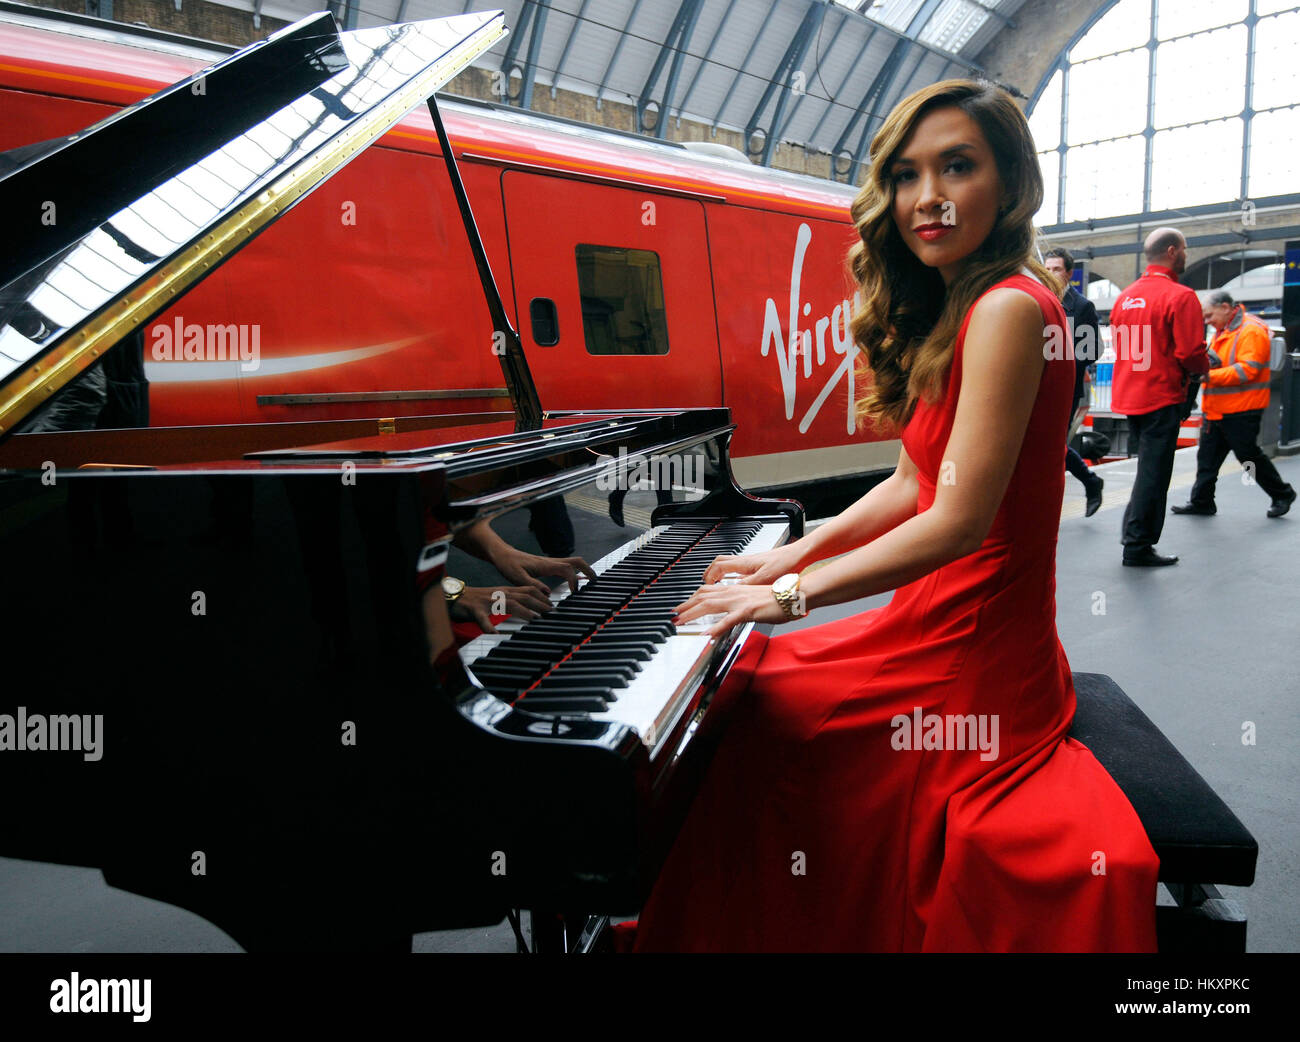 Myleene Klass gives a live piano performance on a baby grand piano at  King's Cross station, London, to mark the completion of a £40million  investment by Virgin Trains in its fleet of